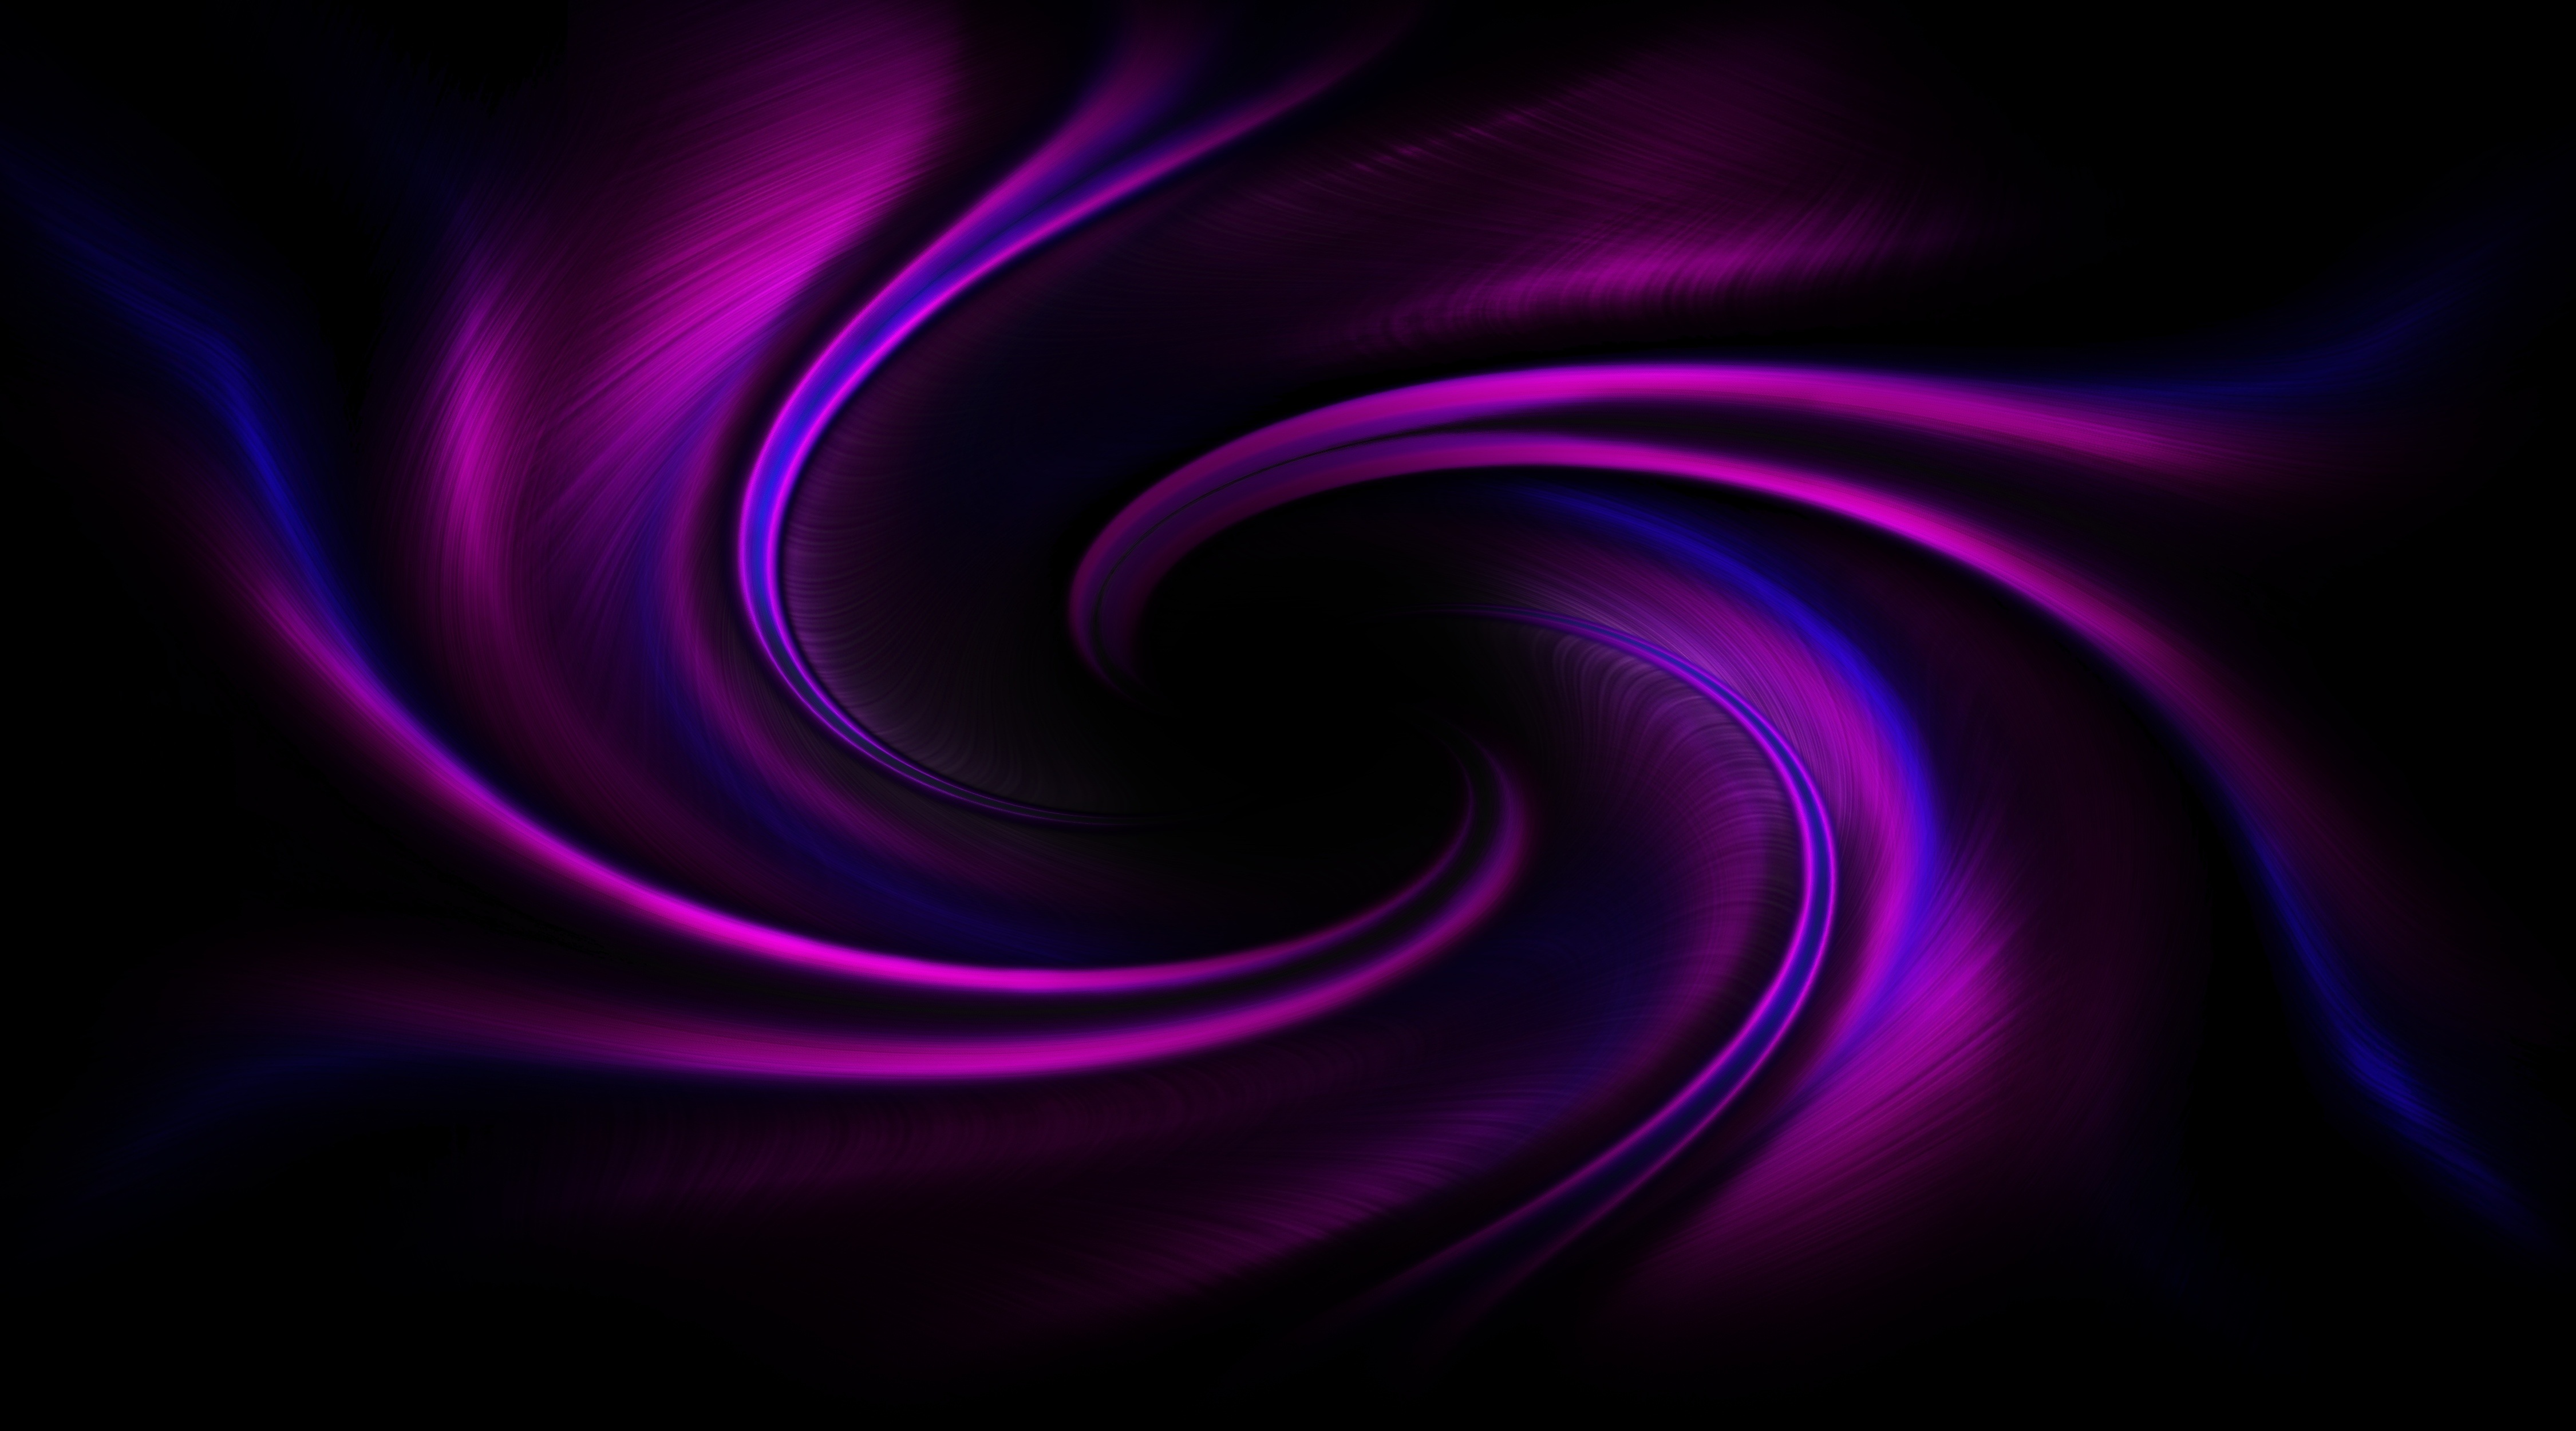 violet, abstract, relief, rotation, purple, merge, confluence, maelstrom, whirlpool